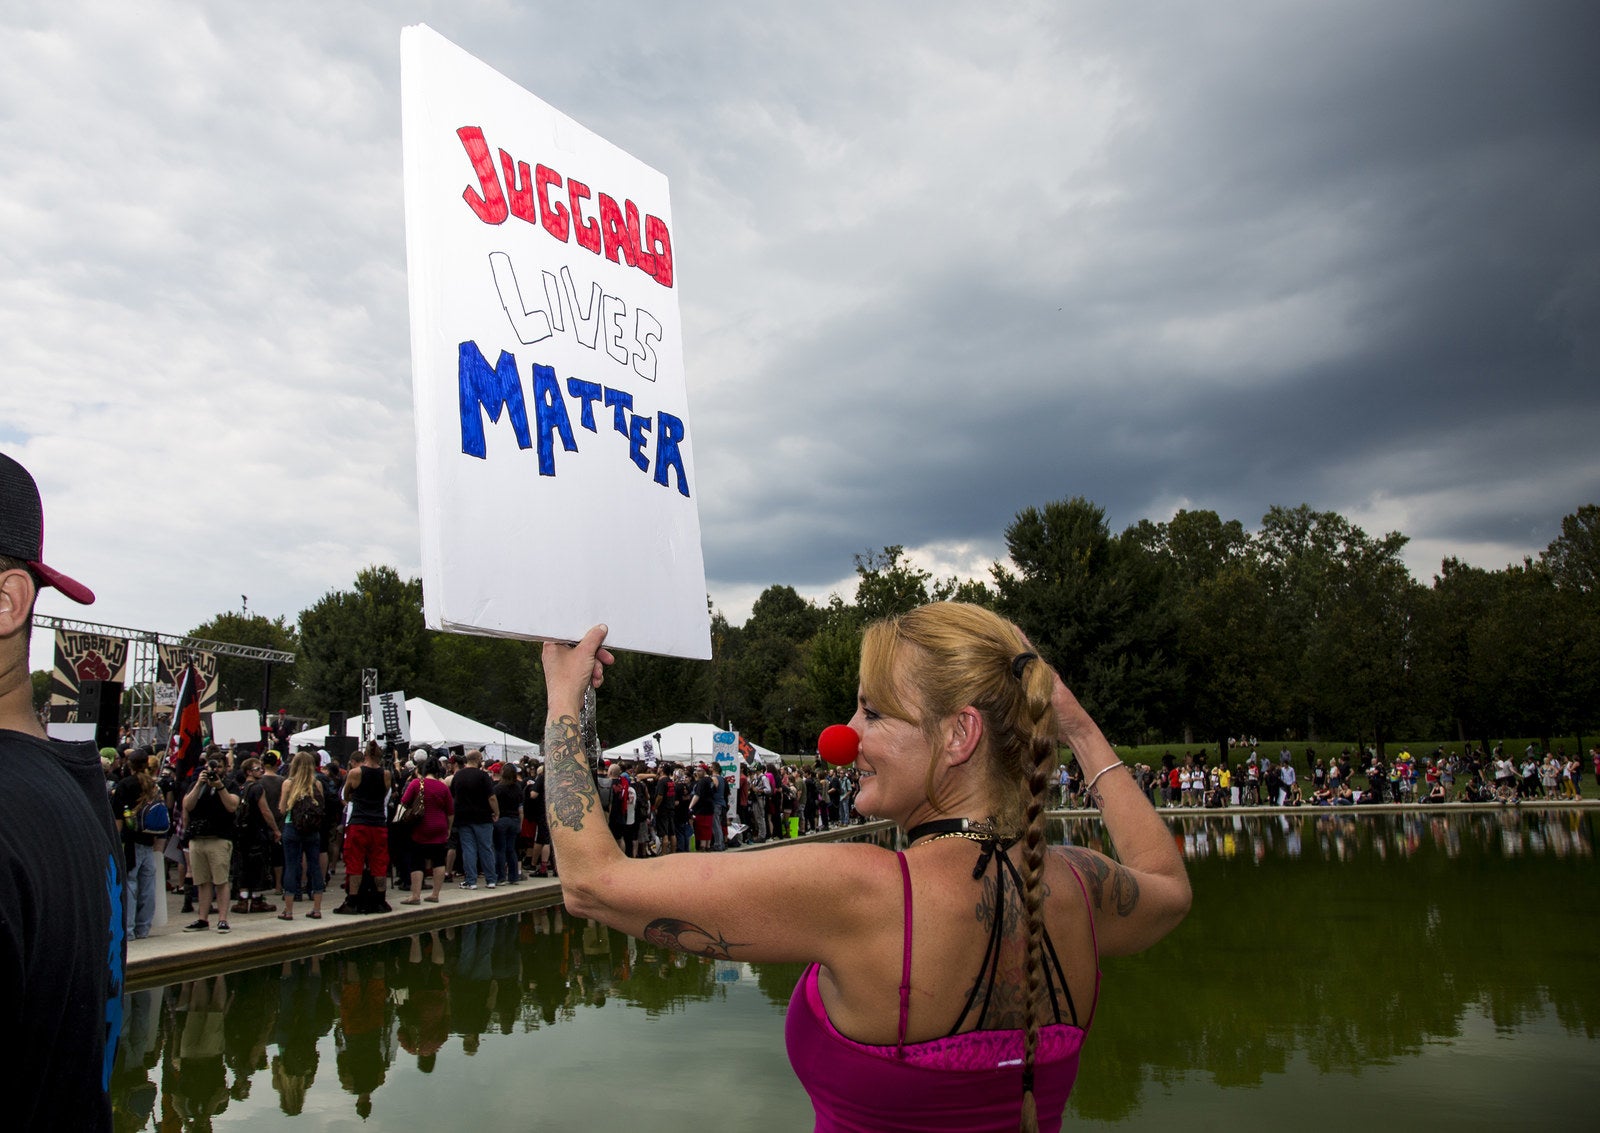 The Juggalos Marched For Their Rights. Will They March For Yours?